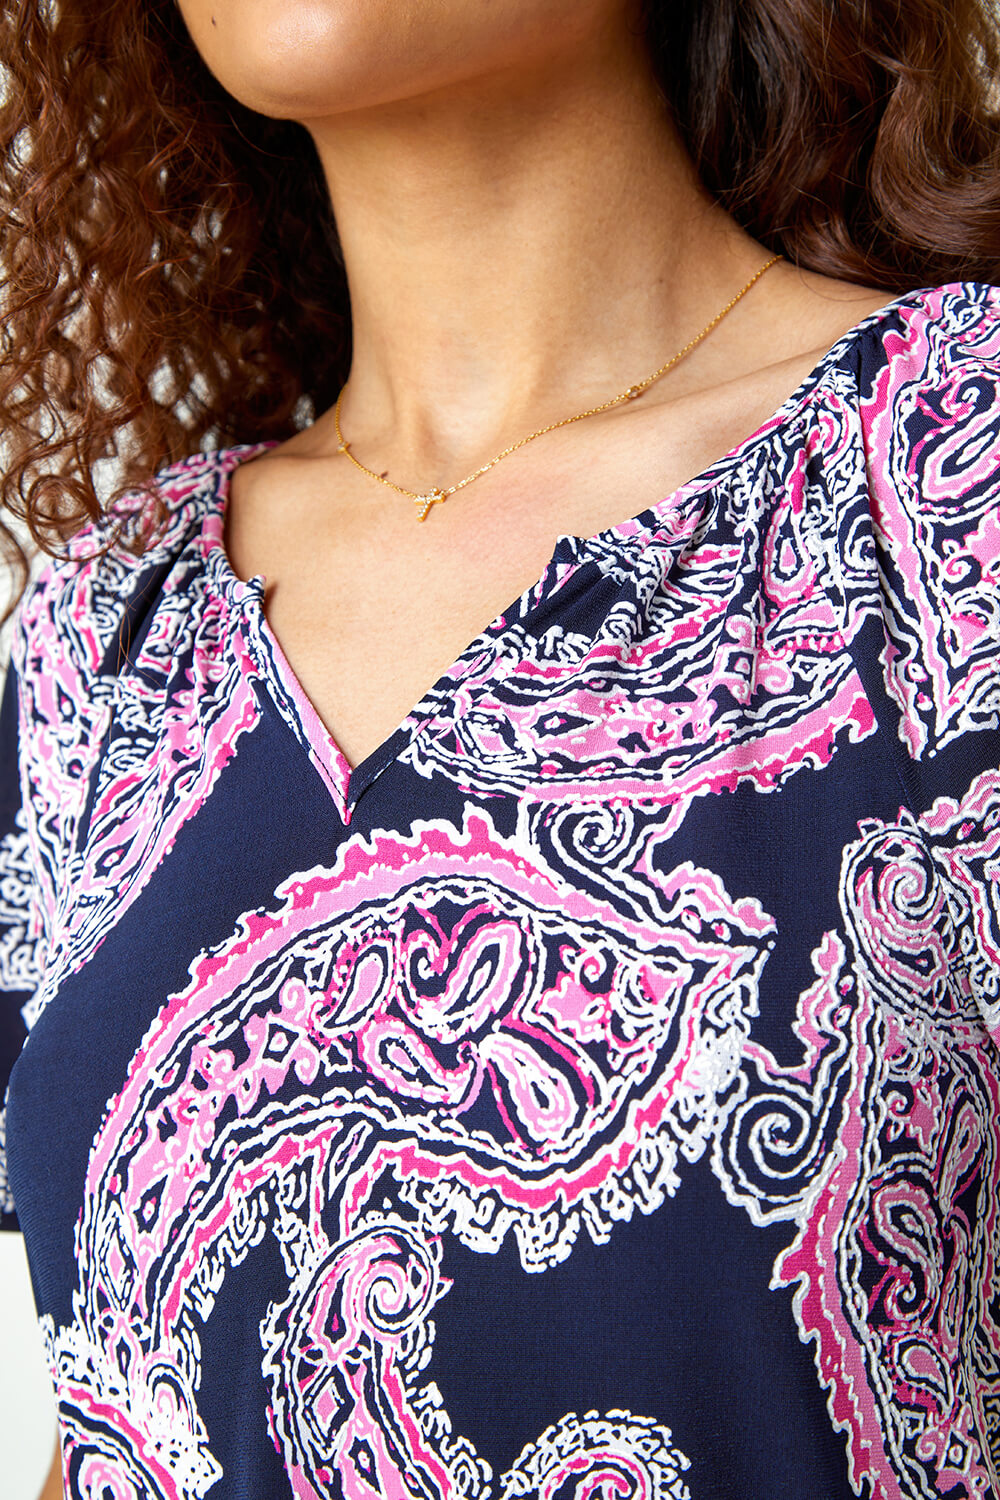 PINK Textured Paisley Print Stretch T-Shirt, Image 5 of 5